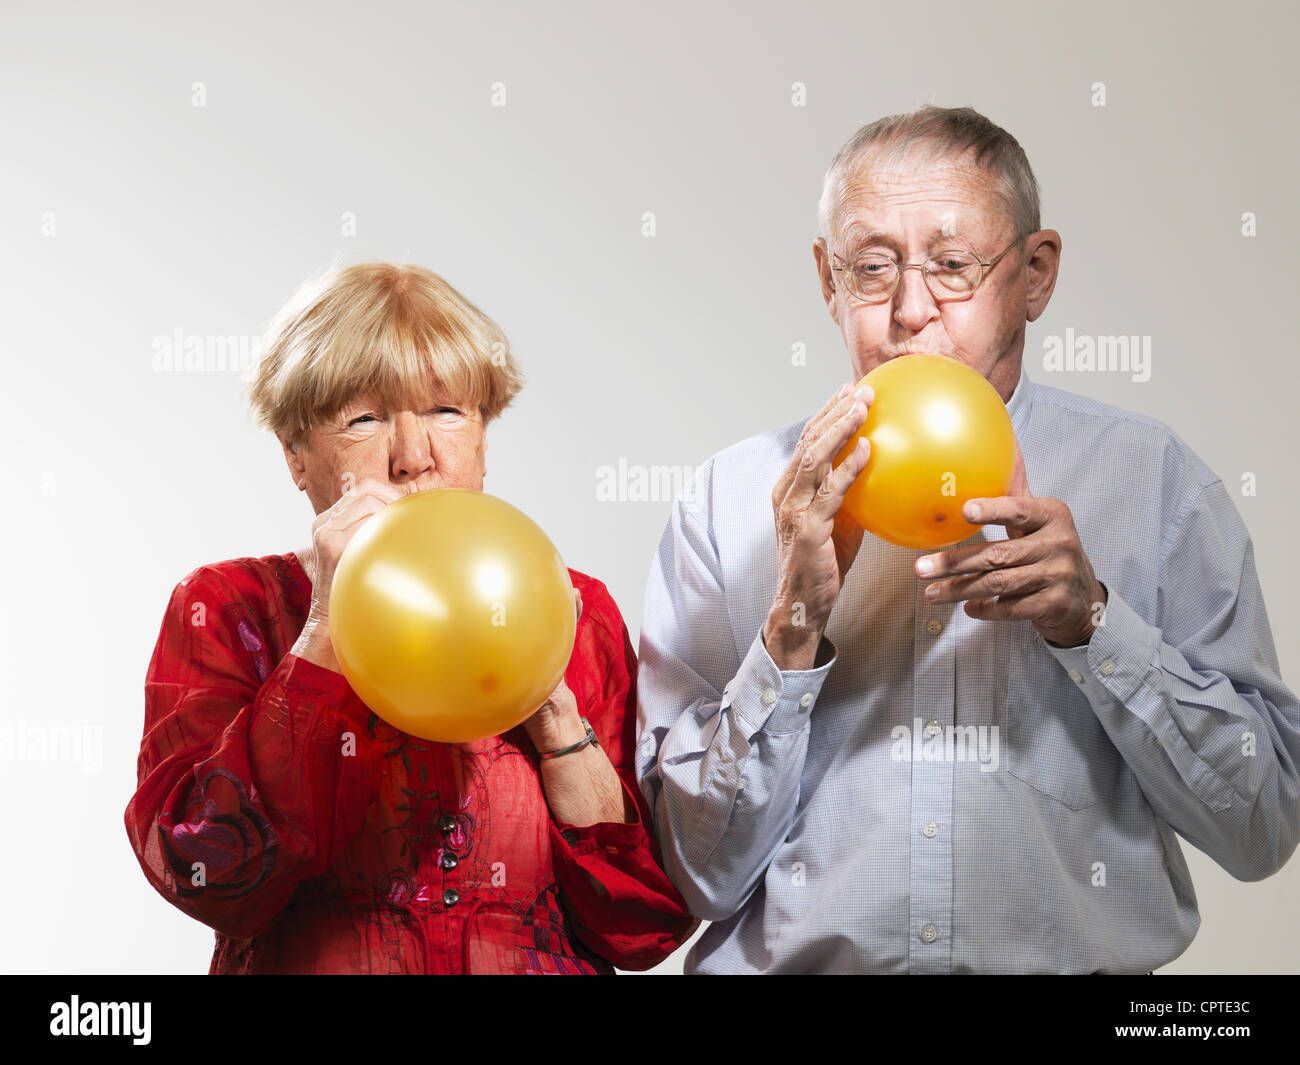 Senior blowing up balloons against white background Stock Photo